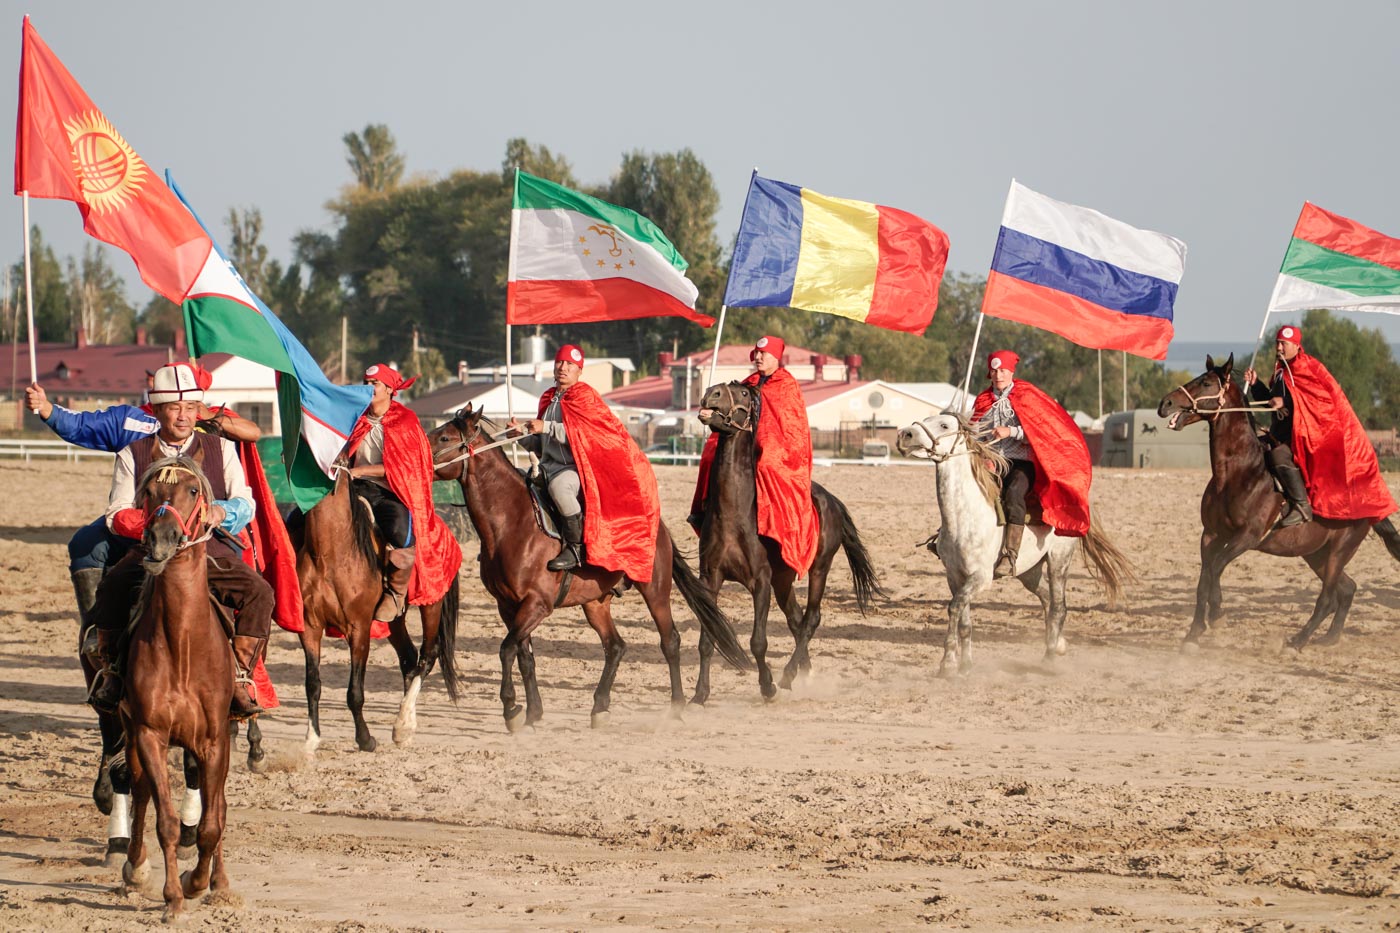 Group of horse men holding many flags from different nations at the world nomads competition